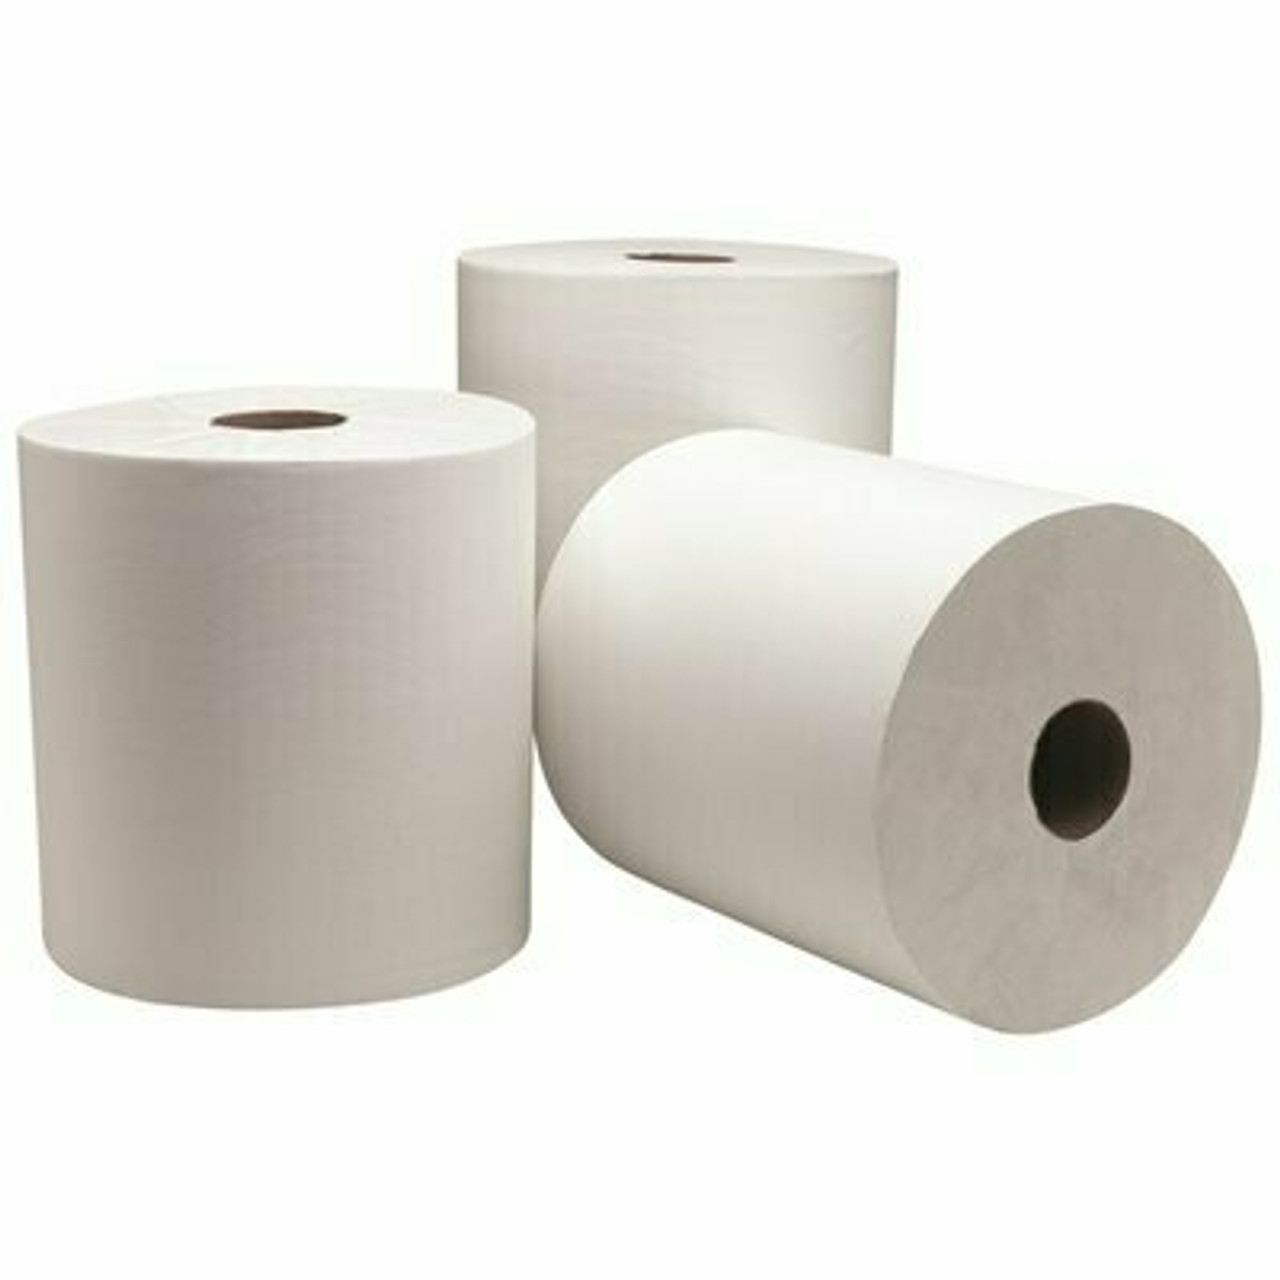 Renown White Advanced High-Capacity Hardwound Paper Towels (1,000 Ft. Per Roll, 6-Rolls Per Case)